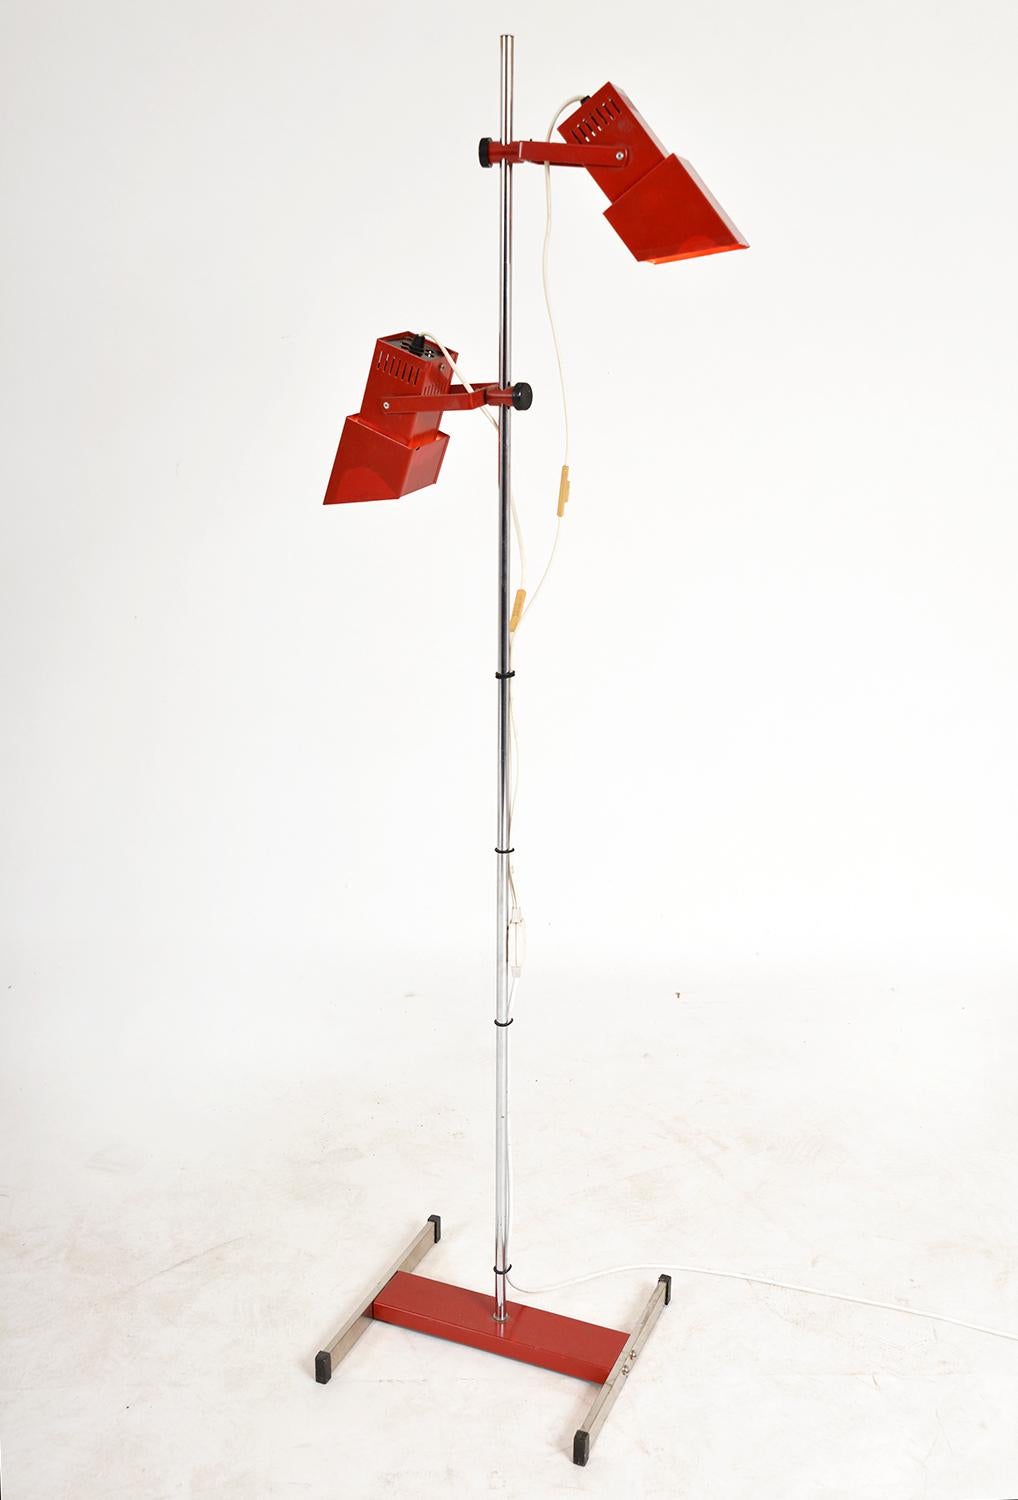 This unusual 1980s Italian floor lamp features a chromed aluminium pole stood on a chromed i-beam style base, with twin spot square shades that can be adjusted in height and angle. The lamp is equipped with a double switch, thereby the spotlights